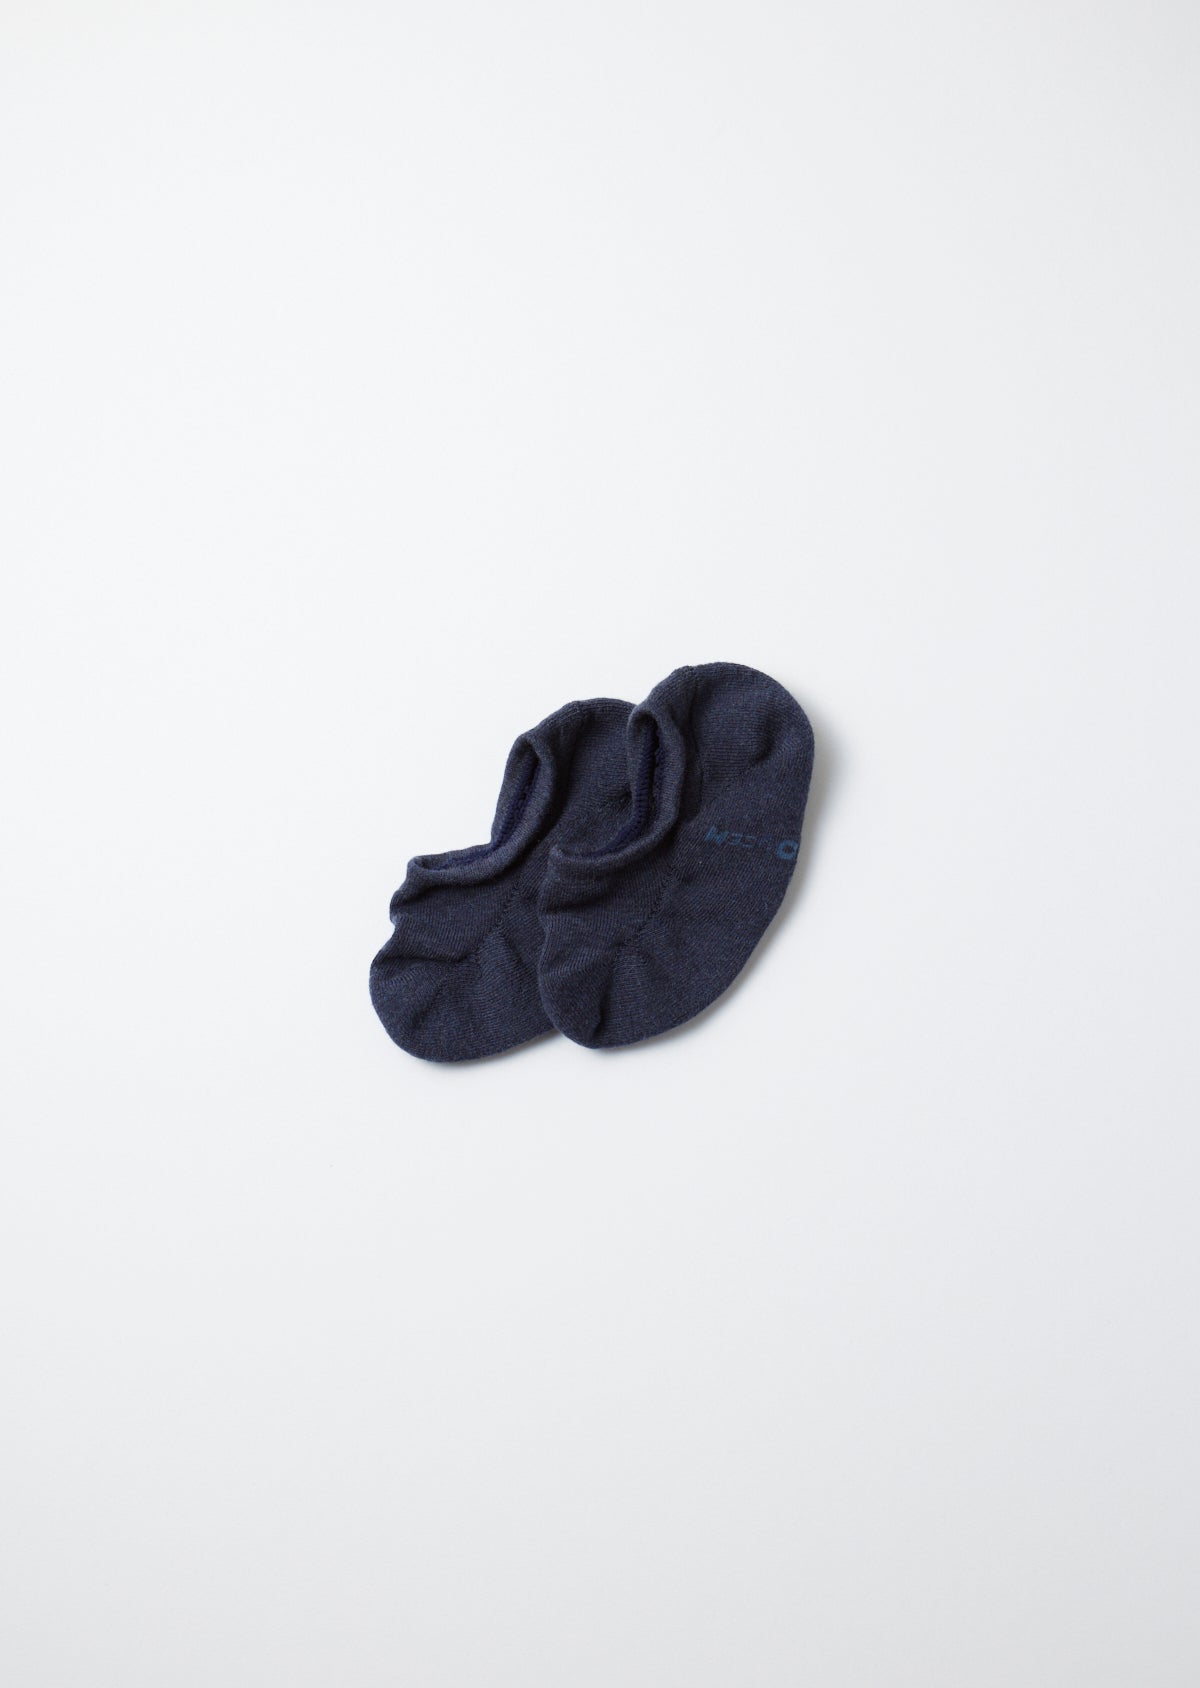 Pile Foot Cover - navy